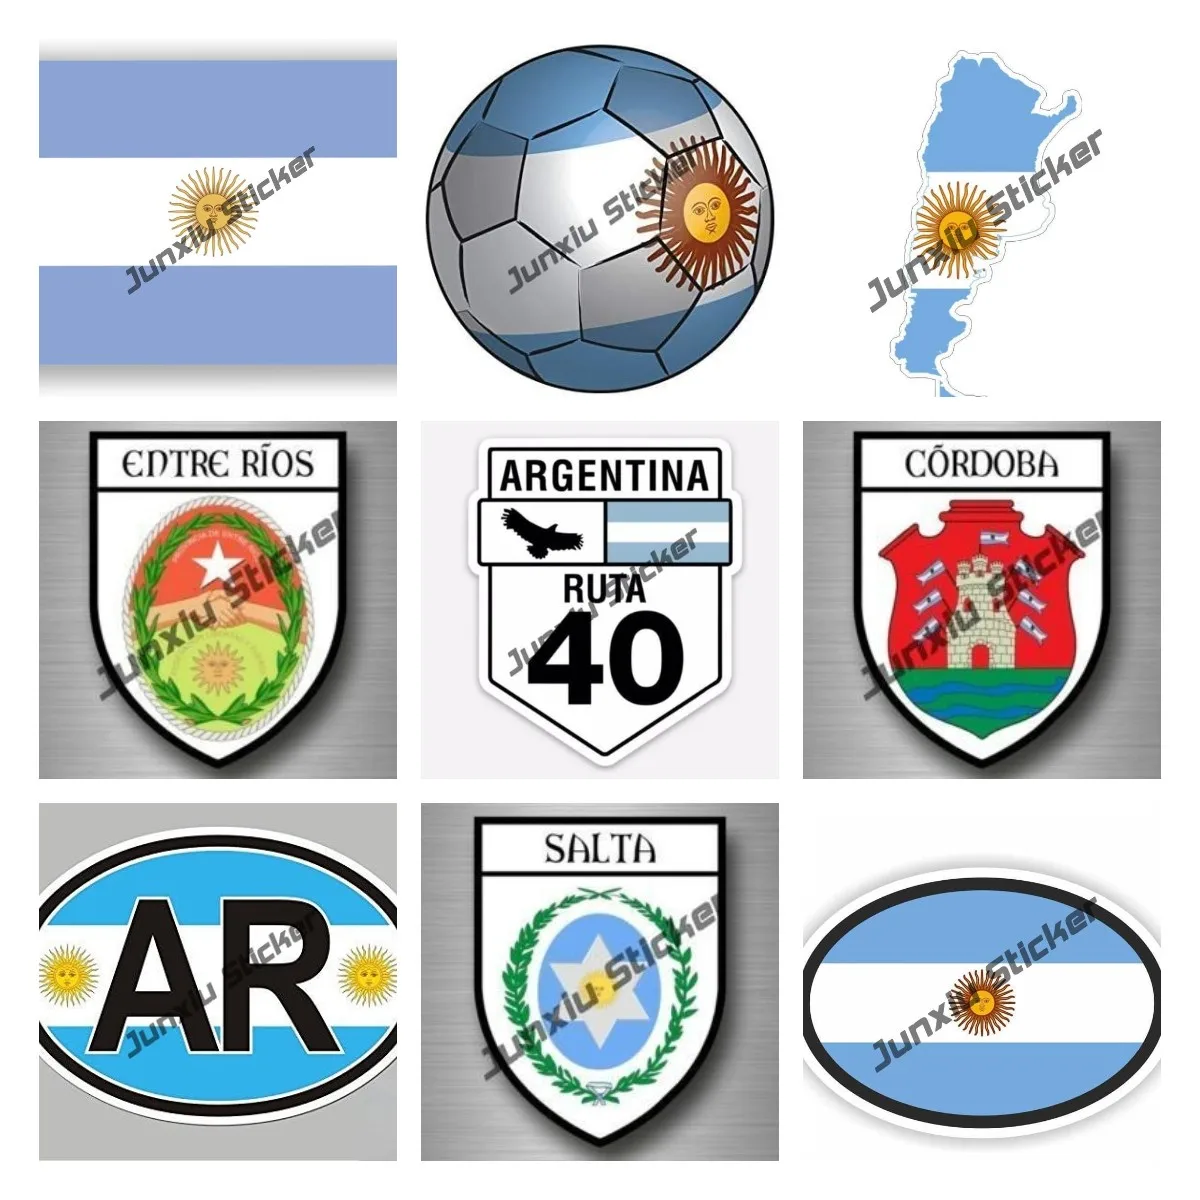 ARGENTINA  LONG COUNTRY FLAG  METALLIC BUMPER STICKER DECAL ..11.75 X 3 INCH 